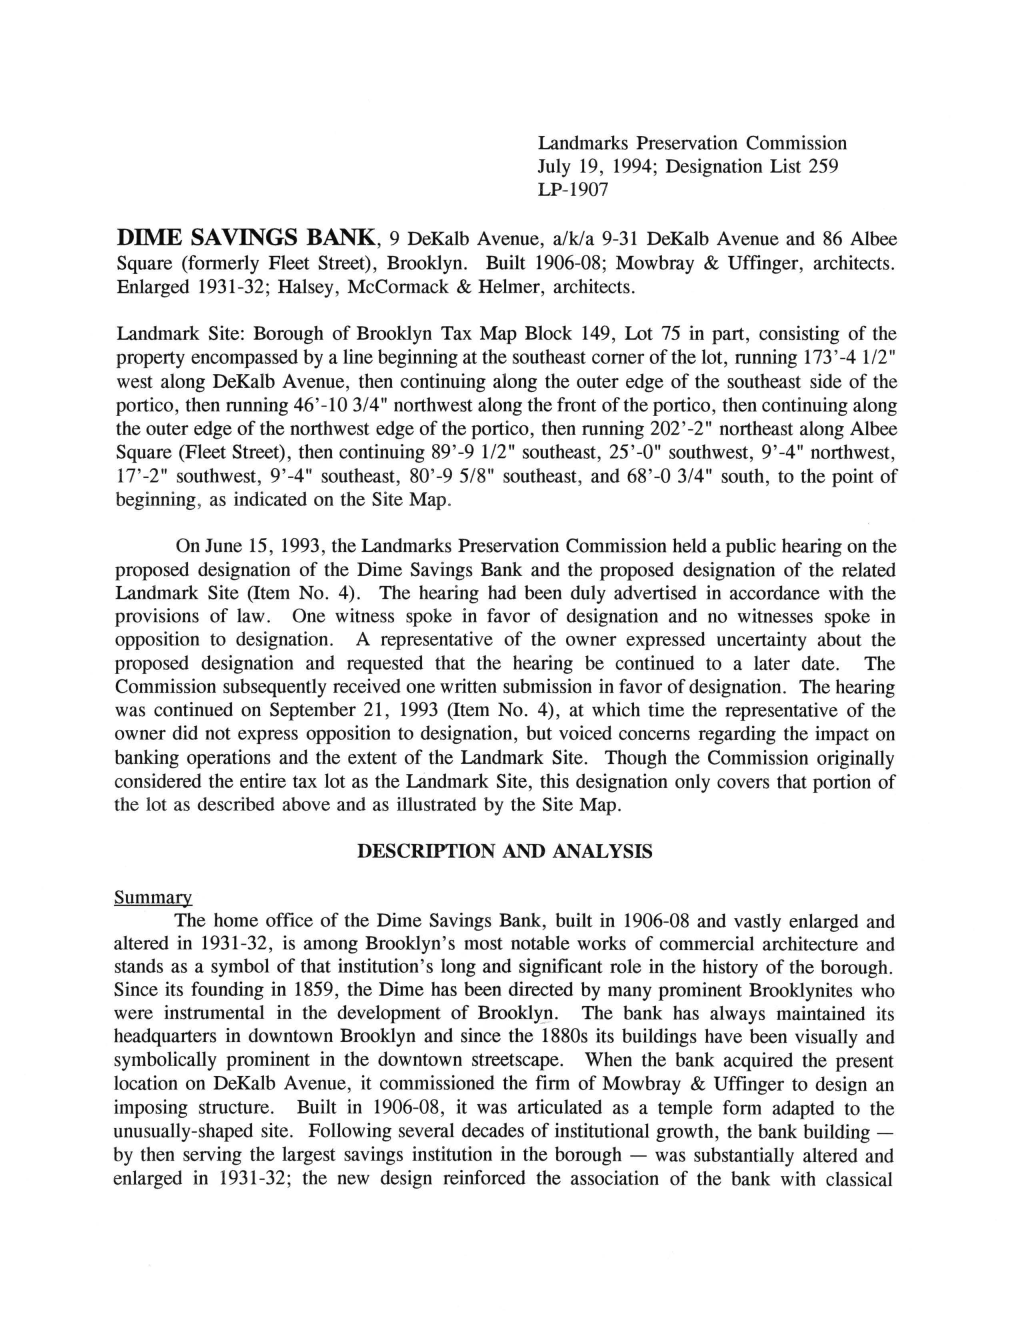 Dime Savings Bank and the Proposed Designation of the Related Landmark Site (Item No